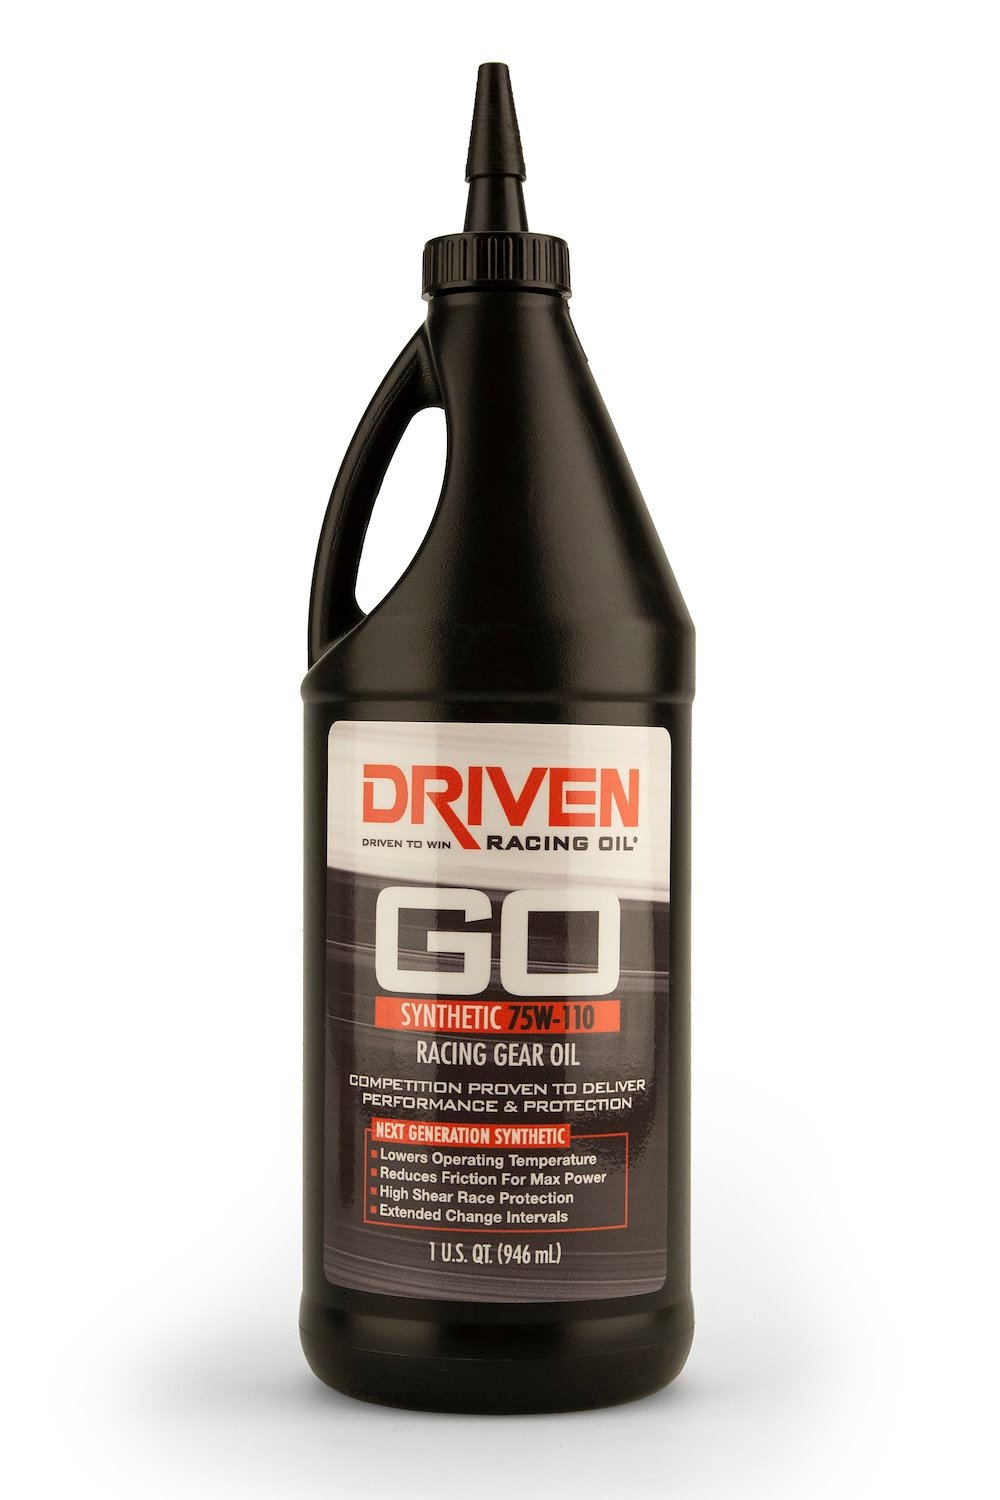 Synthetic 75W-110 Racing Gear Oil 1 Quart